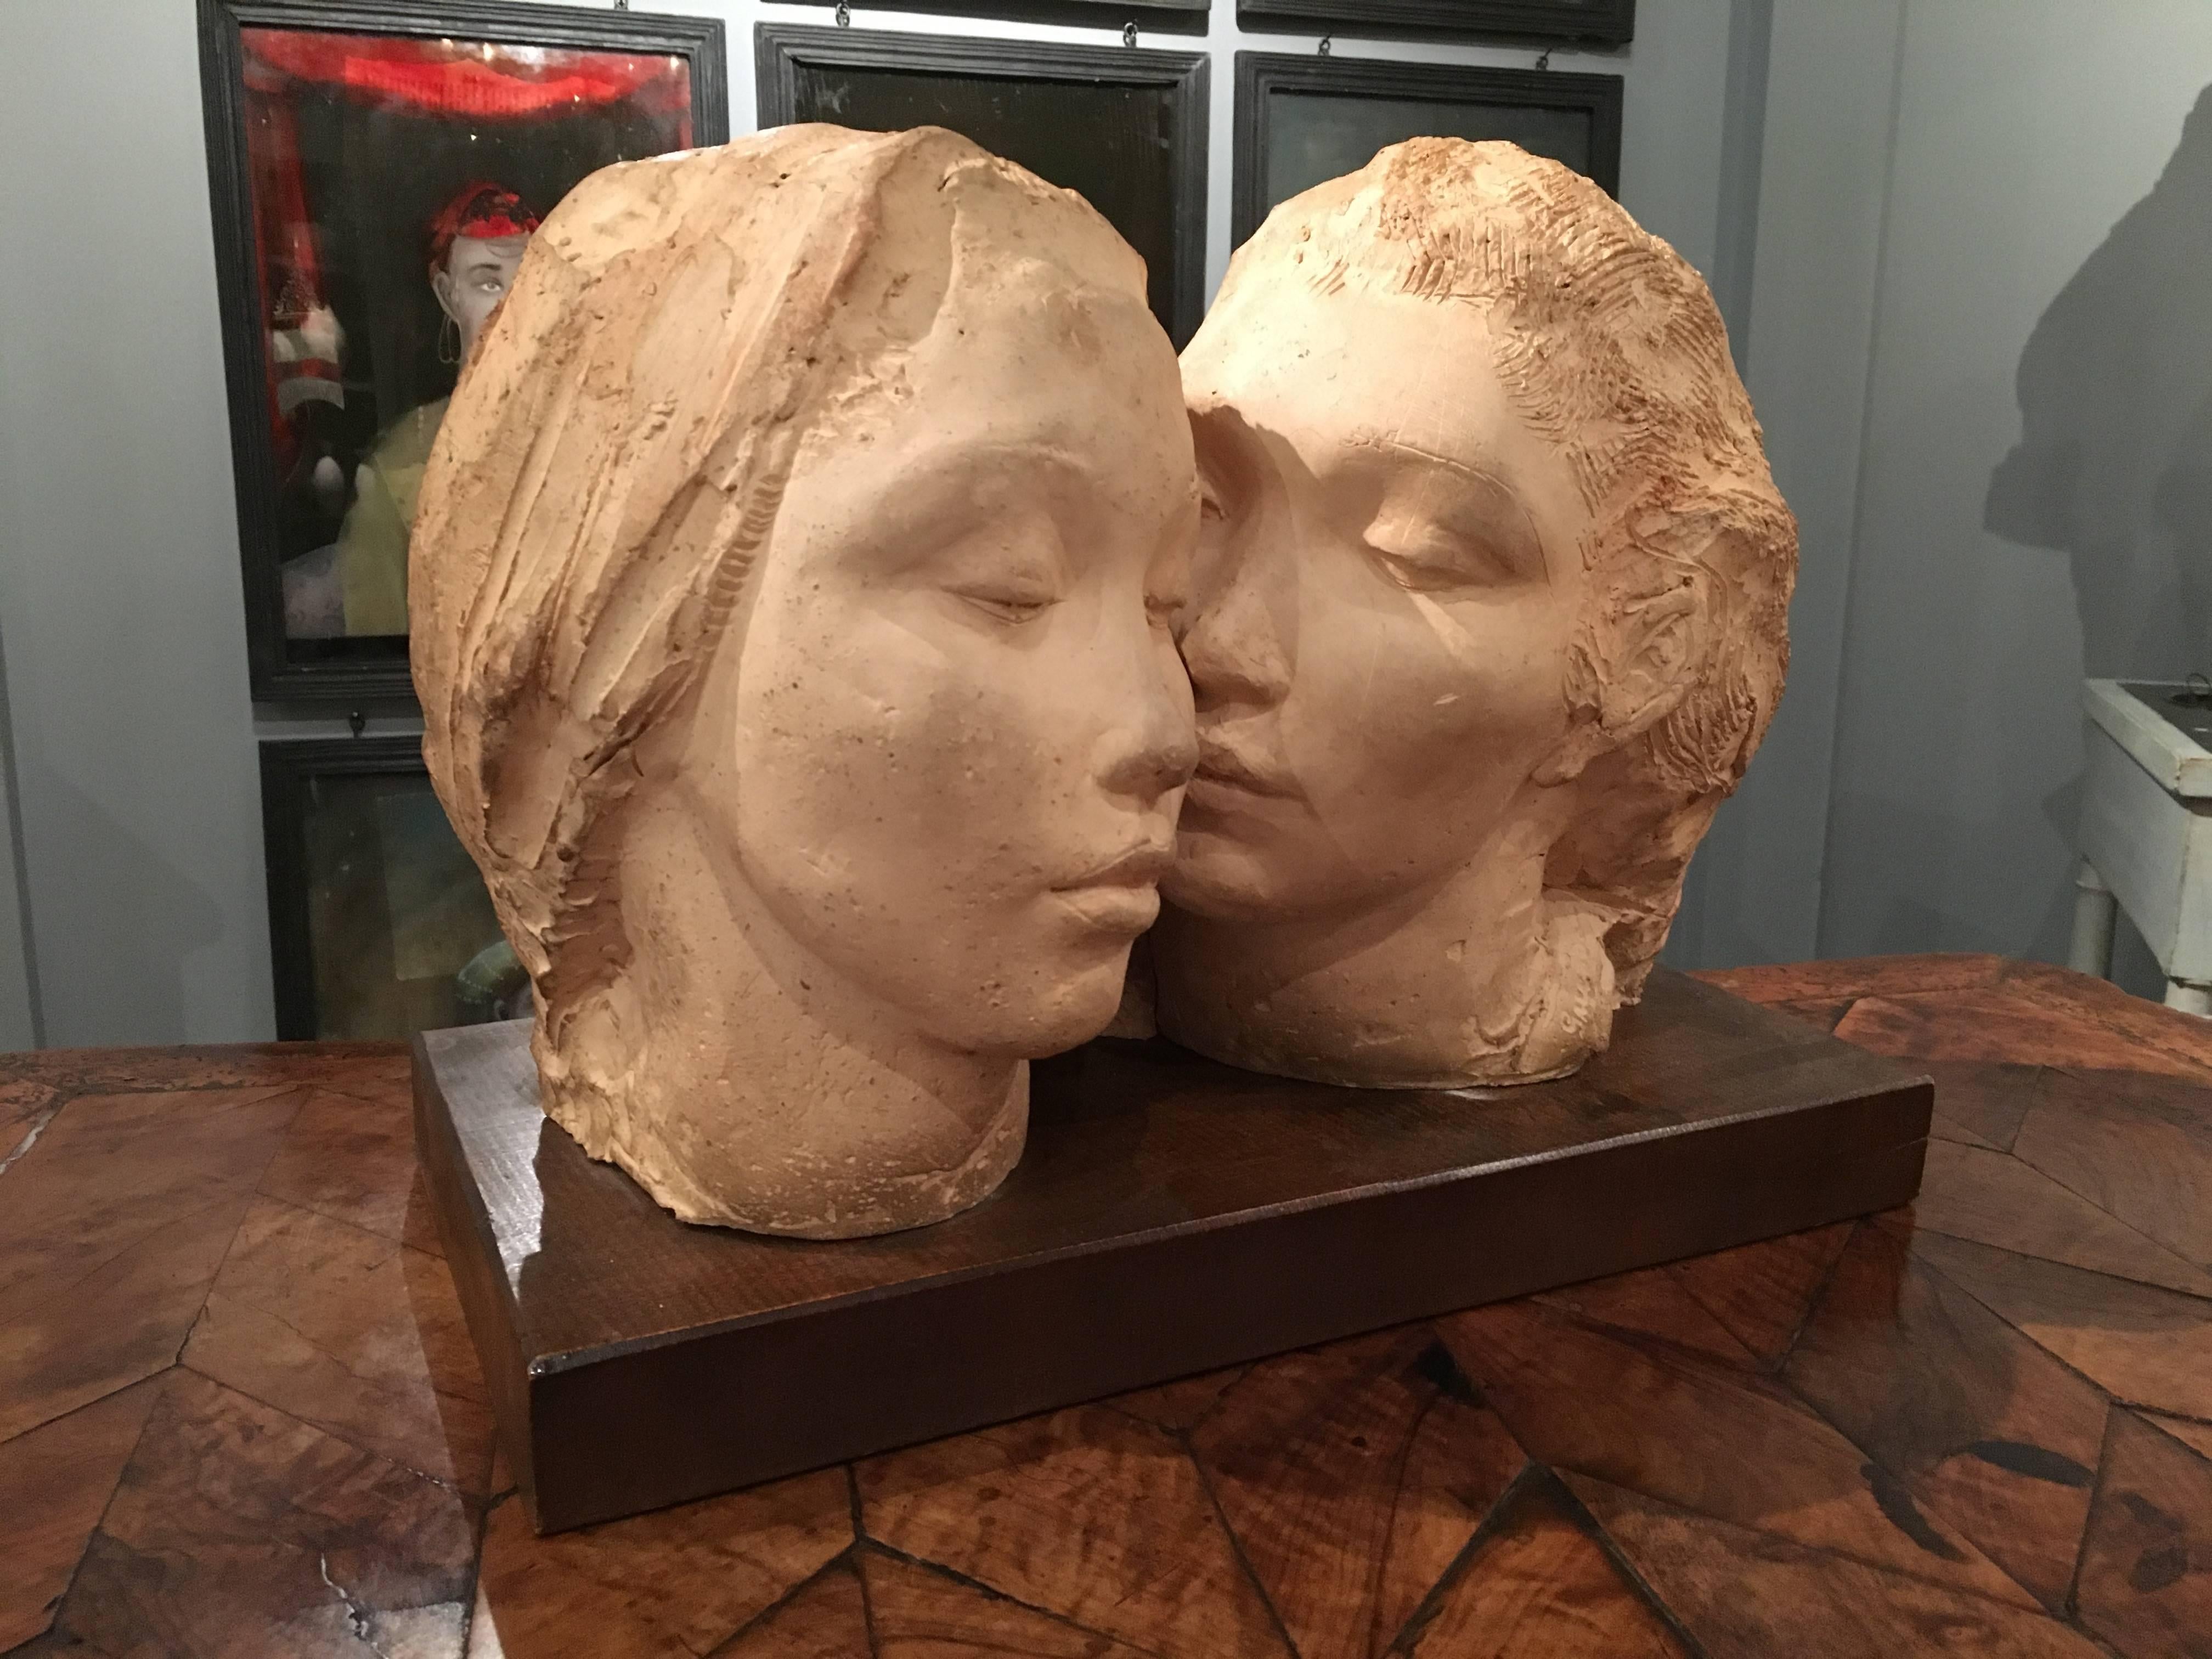 Stucco Sculpture of Two Women, by Dorothea Greenbaum 2